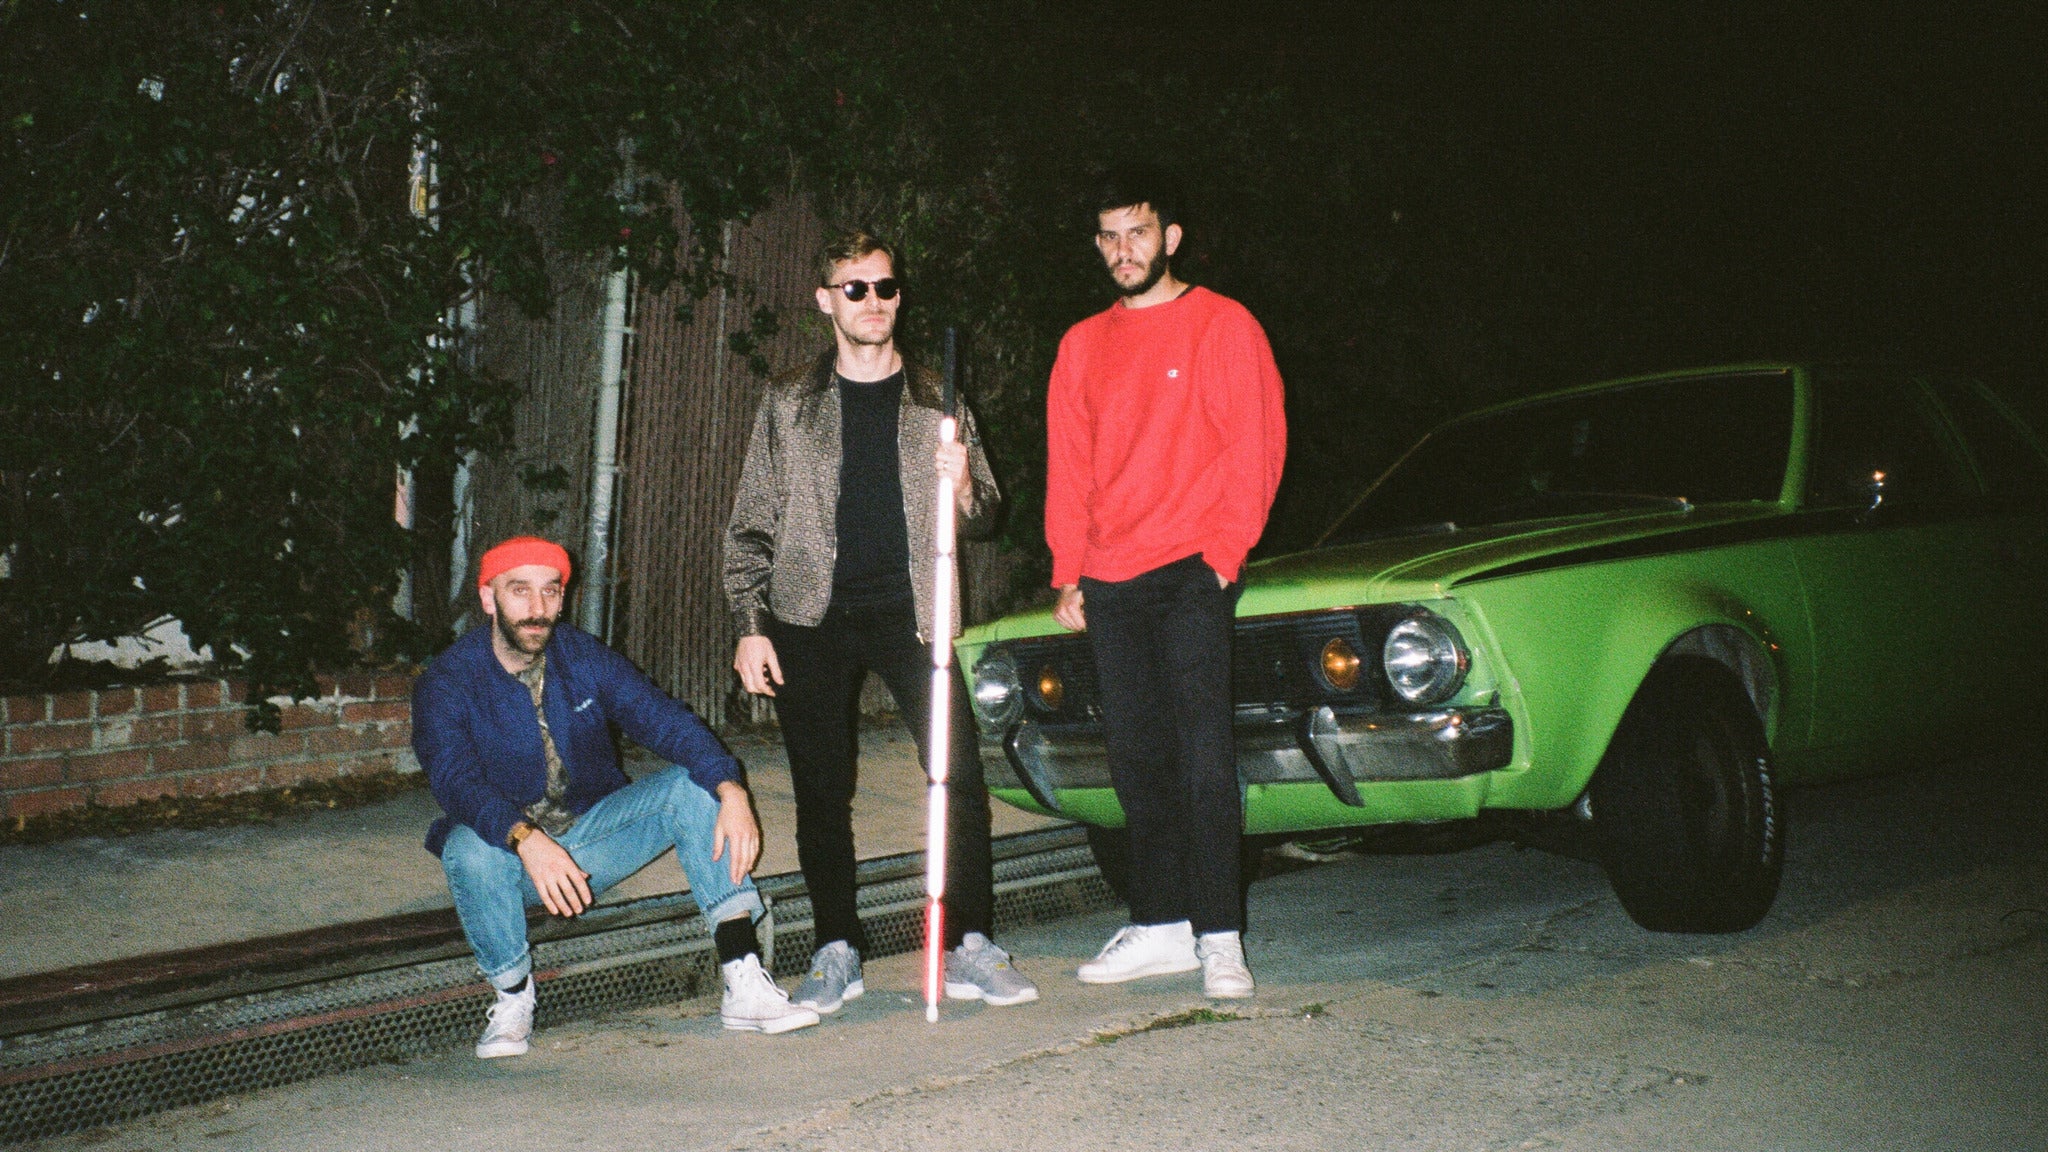 X Ambassadors - The Orion Tour in Ft Lauderdale promo photo for Official Platinum presale offer code